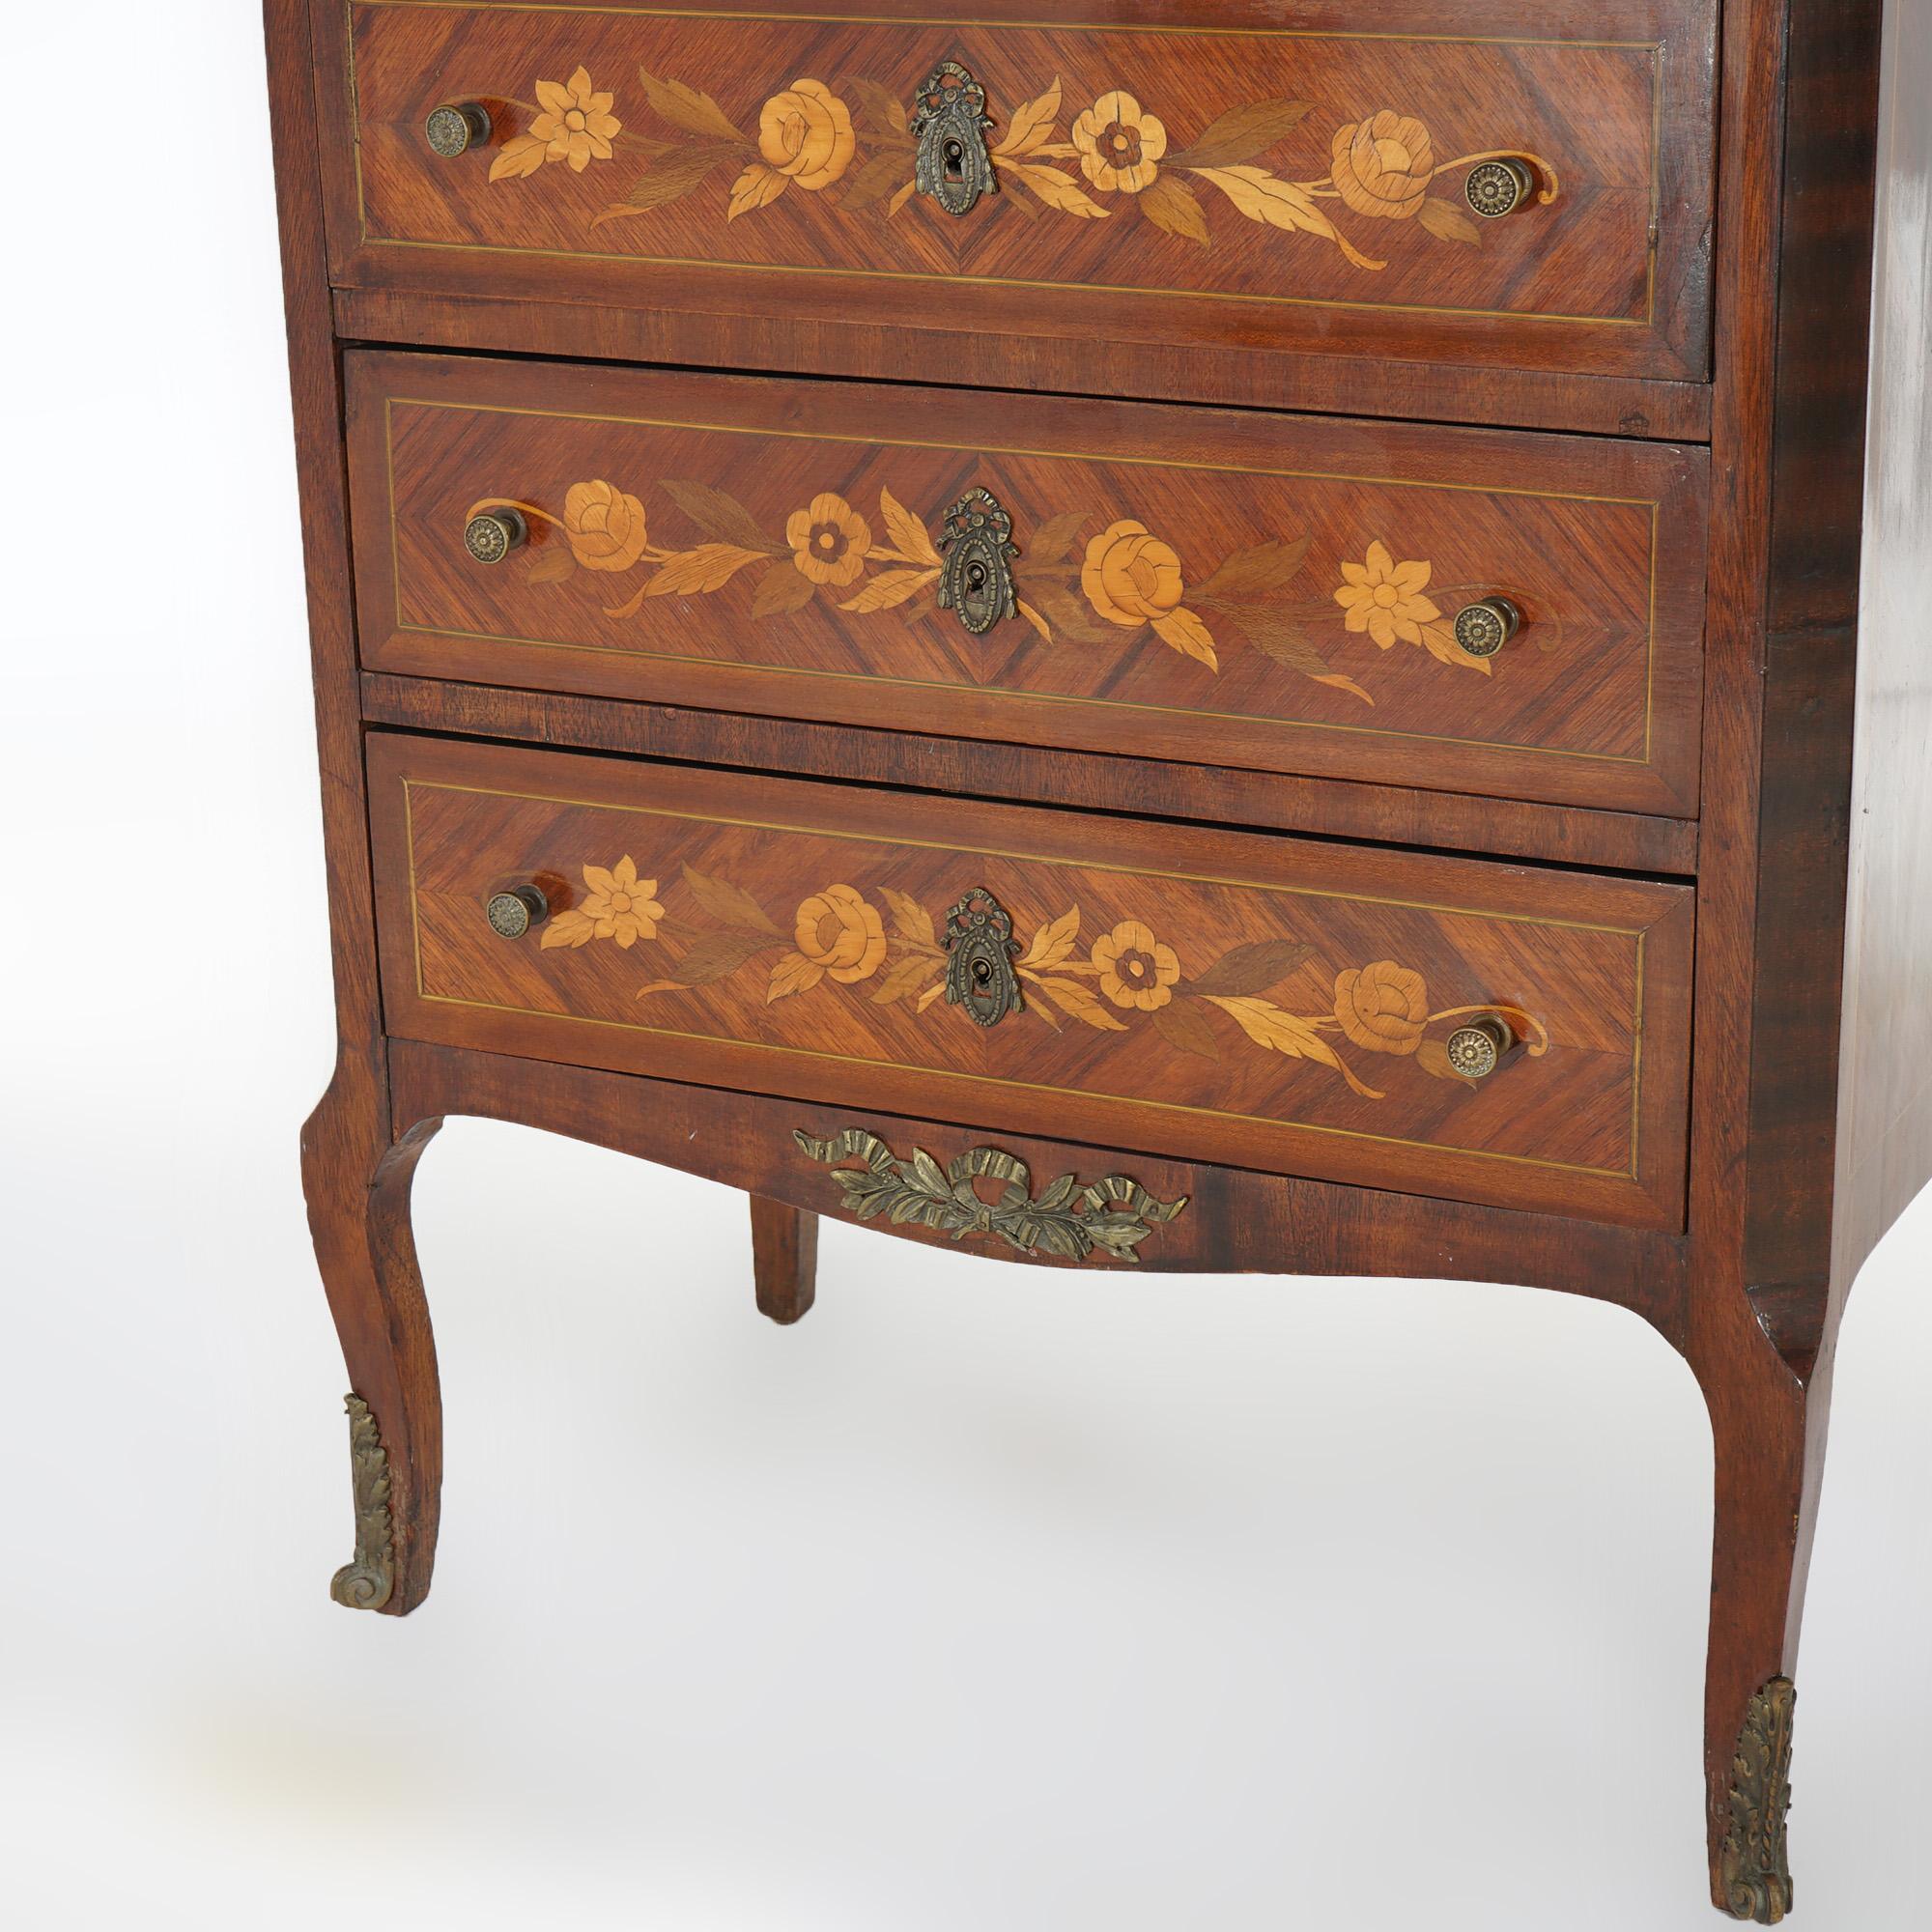 Antique French Kingwood, Satinwood, Marble & Ormolu Lingerie Chest 19thC For Sale 1